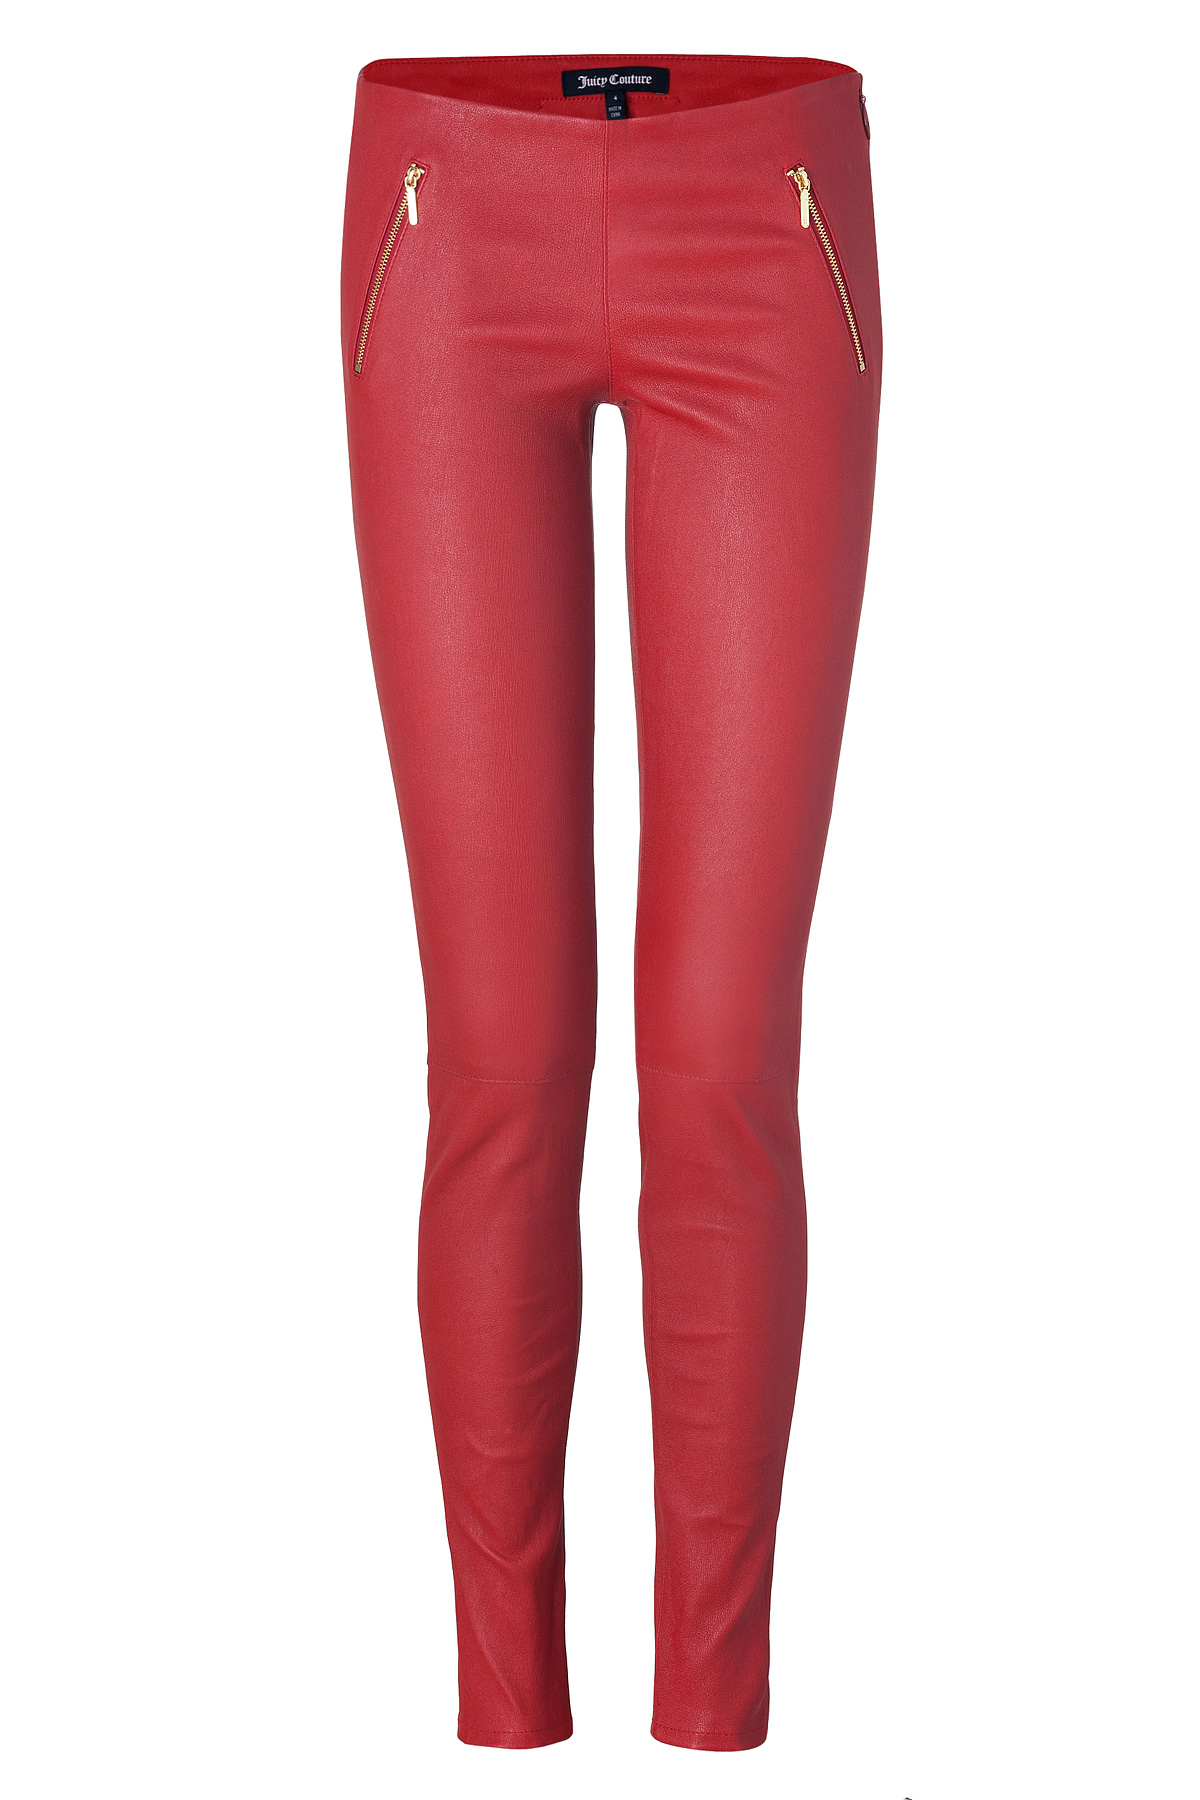 Juicy Couture Oxblood Red Luxe Leather Pants in Red (oxblood) | Lyst